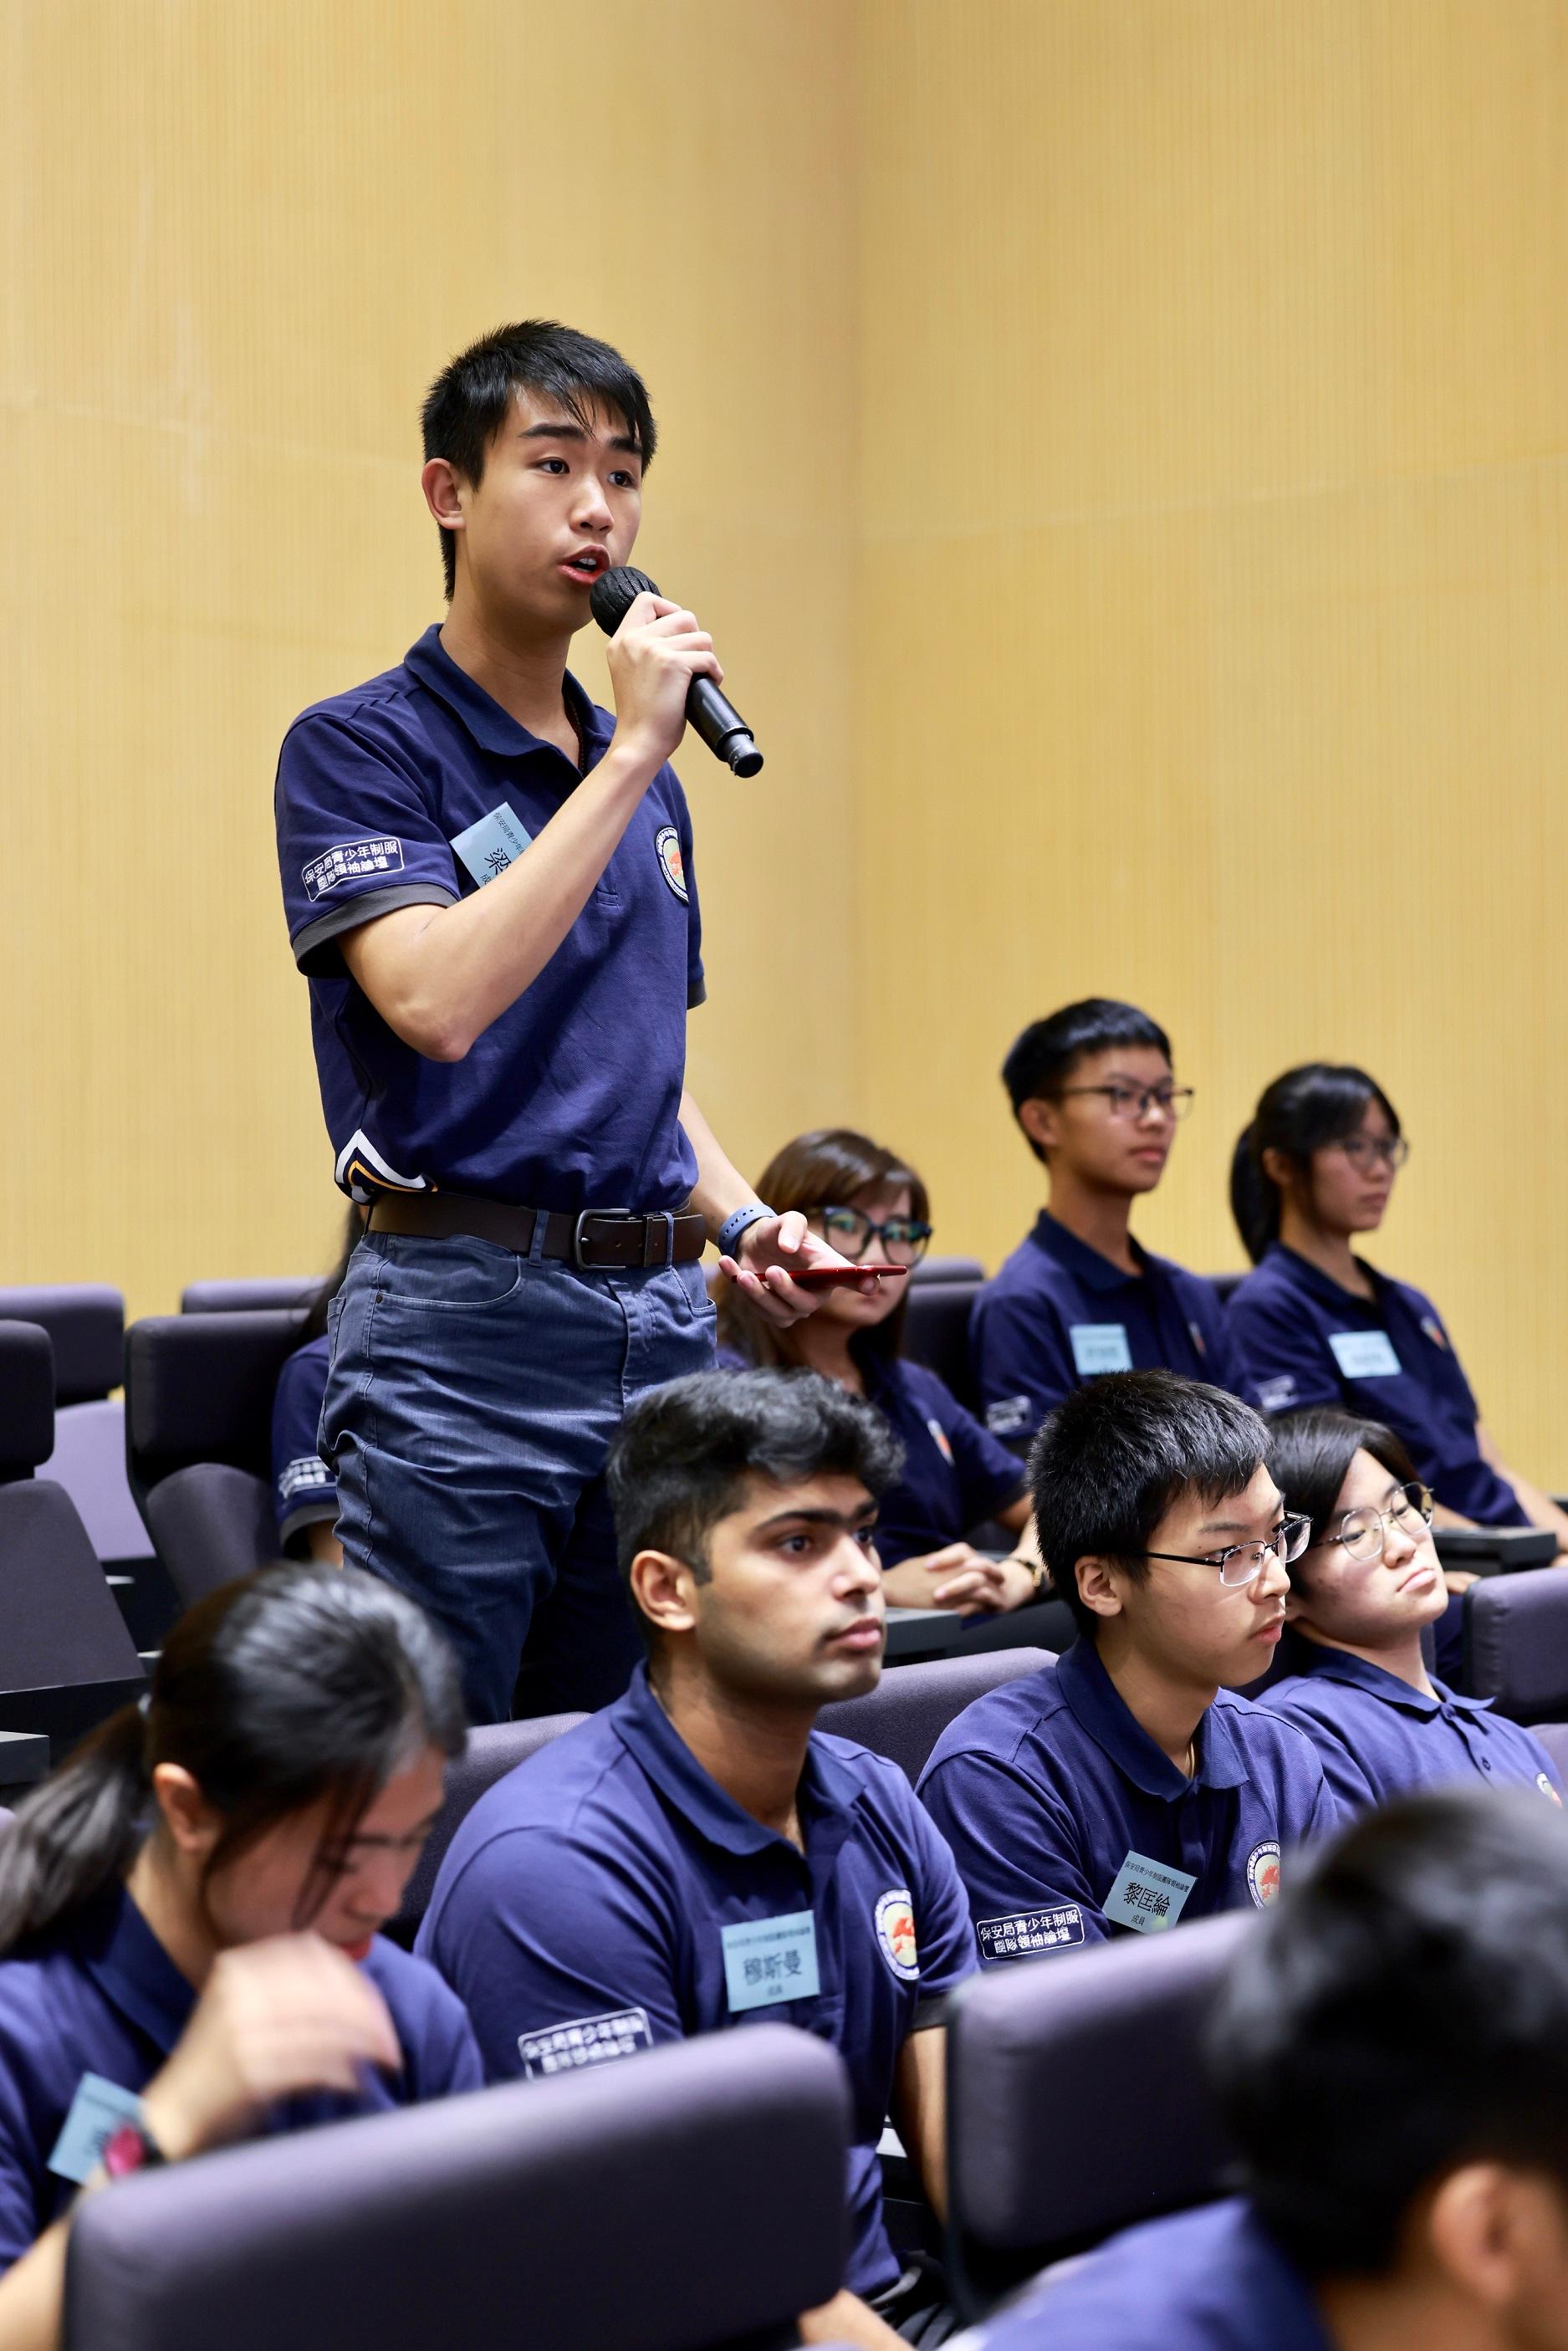 The annual review of the Security Bureau Youth Uniformed Group Leaders Forum (Leaders Forum) was held at the Central Government Offices today (September 23) for youth members of the first year of the Leaders Forum to conclude their experiences and achievements in the past year and give presentations on their research topics. Photo shows a youth member raising a question at the event.